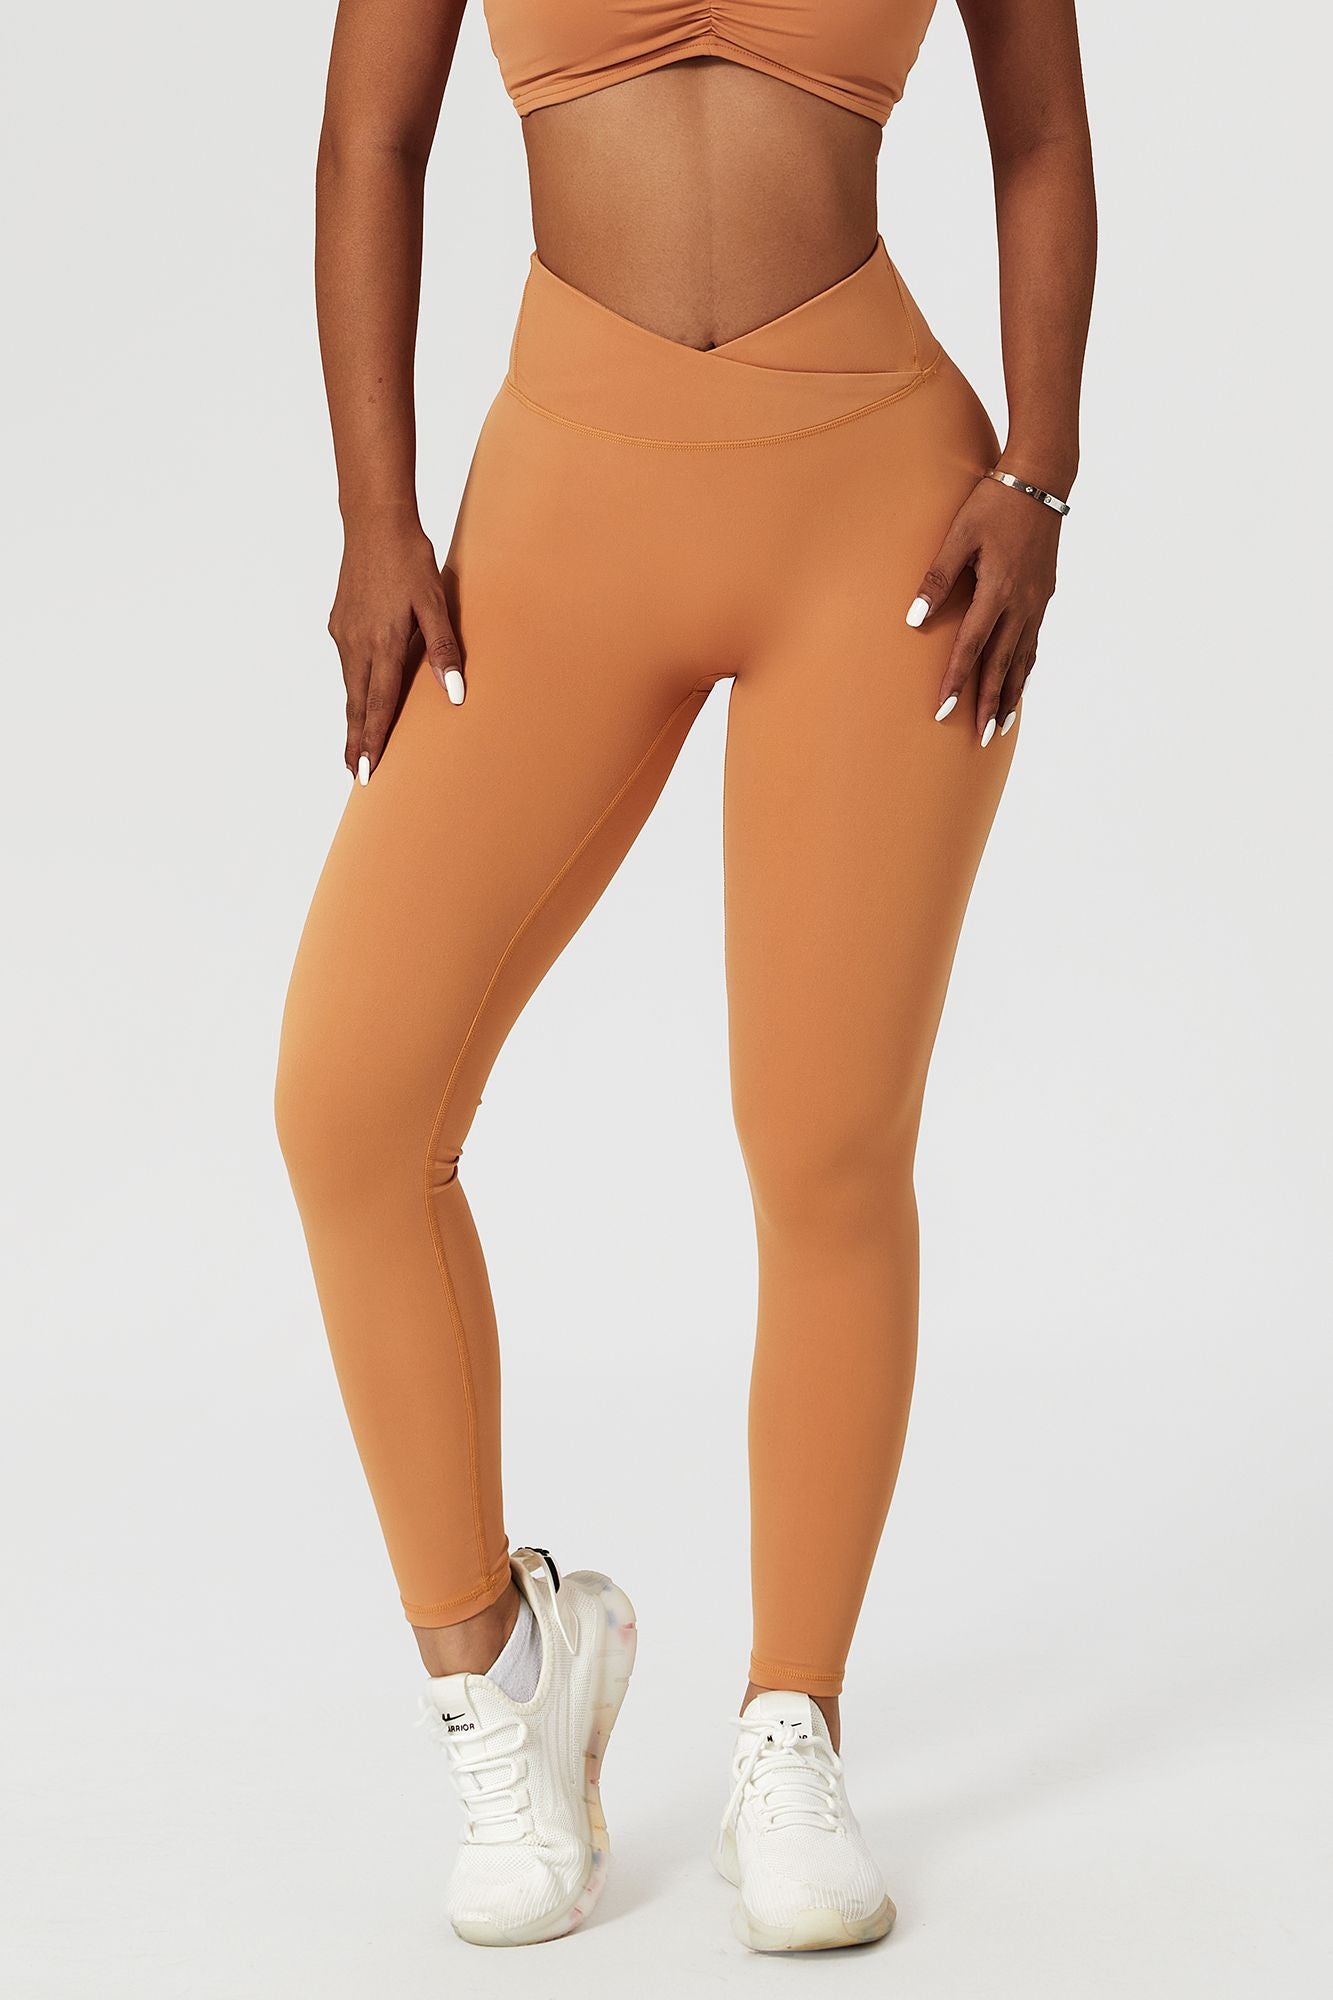 Our Original Sculptseam™ Legging got an upgrade! 🍑 Which front waistband  is your fave? Original or Crossover? 👀 Launching on